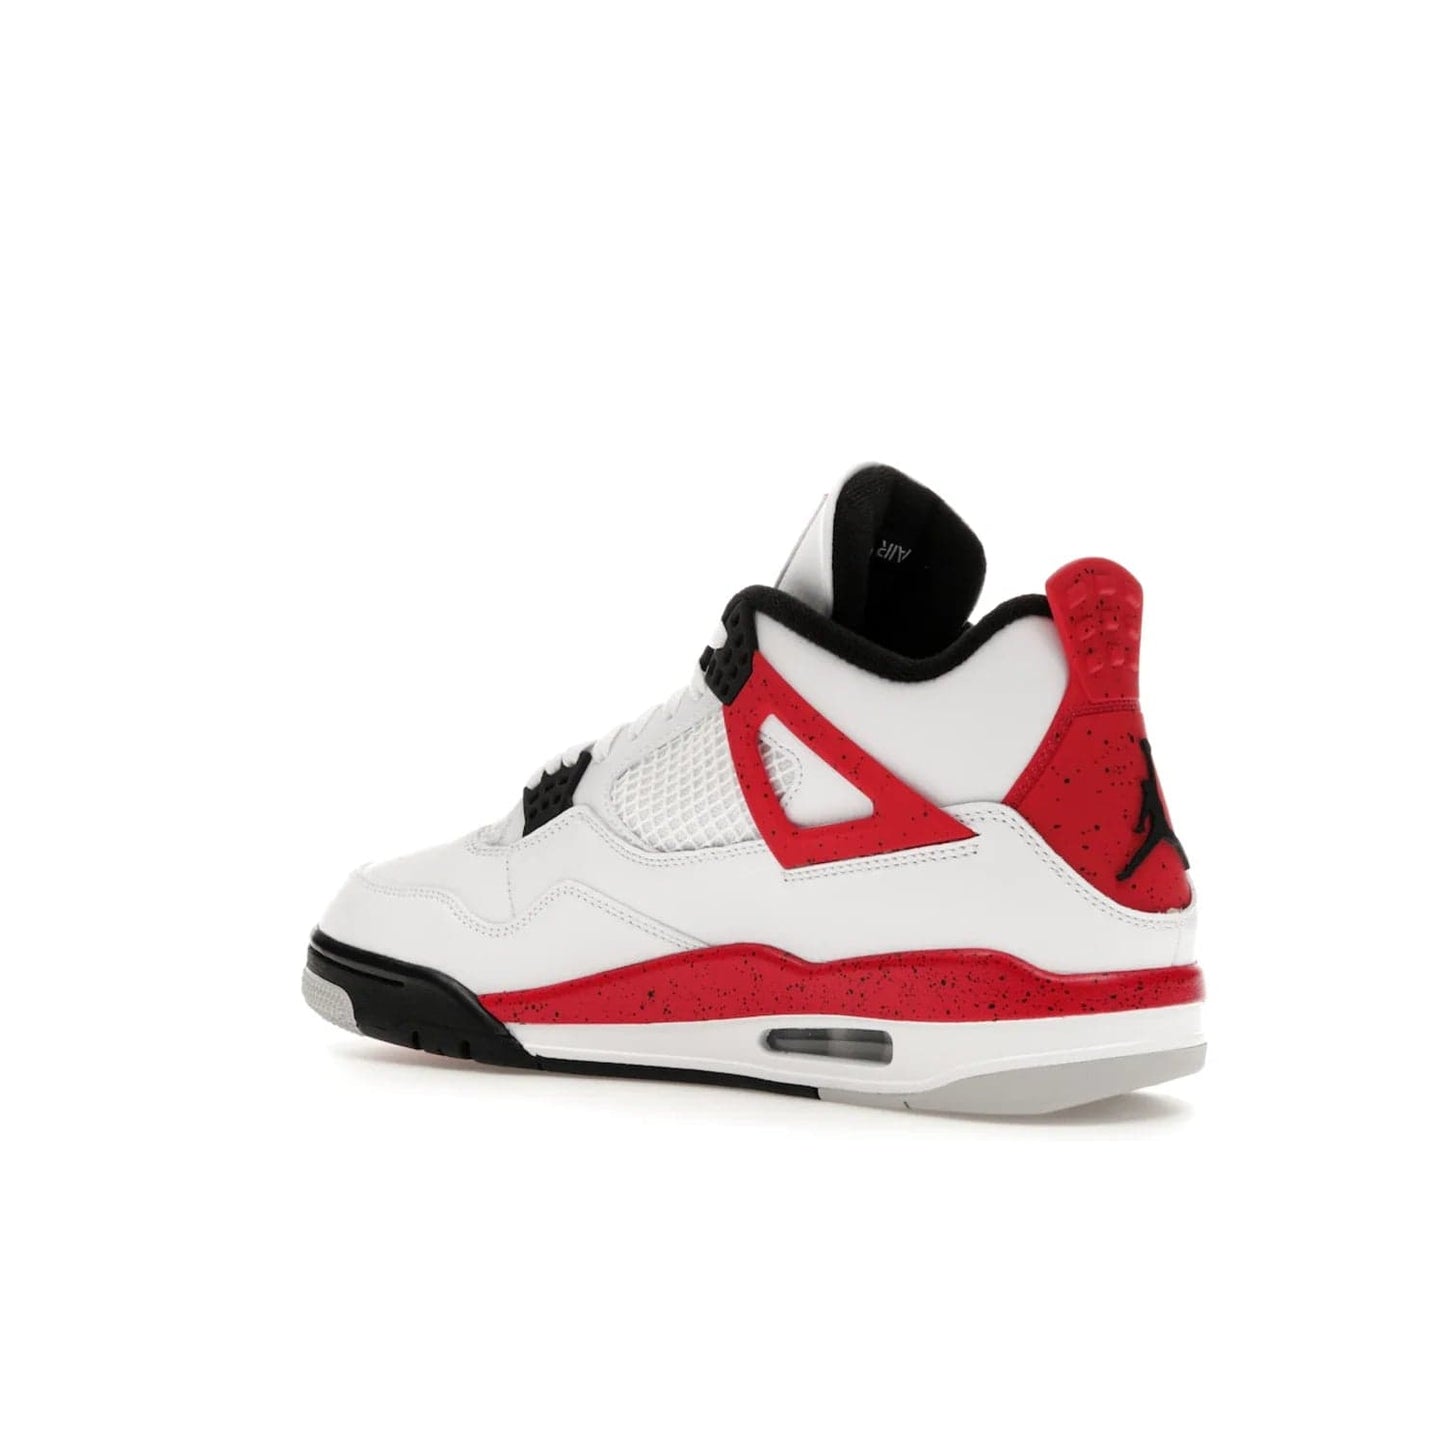 Jordan 4 Retro Red Cement - Image 23 - Only at www.BallersClubKickz.com - Iconic Jordan silhouette with a unique twist. White premium leather uppers with fire red and black detailing. Black, white, and fire red midsole with mesh detailing and Jumpman logo. Jordan 4 Retro Red Cement released with premium price.